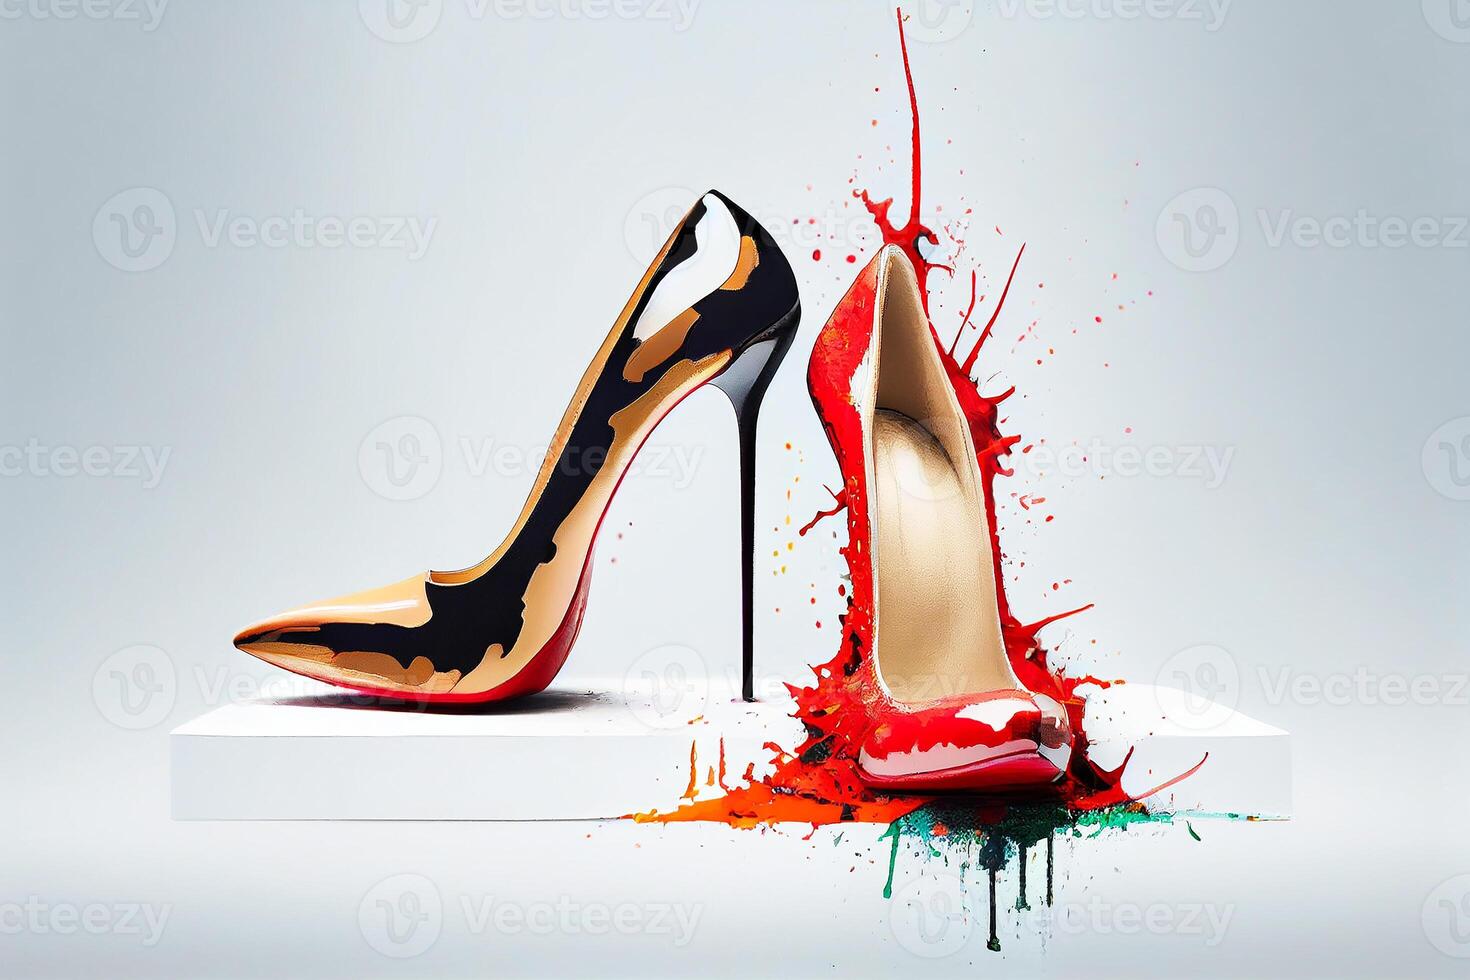 Women's high-heeled shoes in splashes of multicolored paint. Art. photo